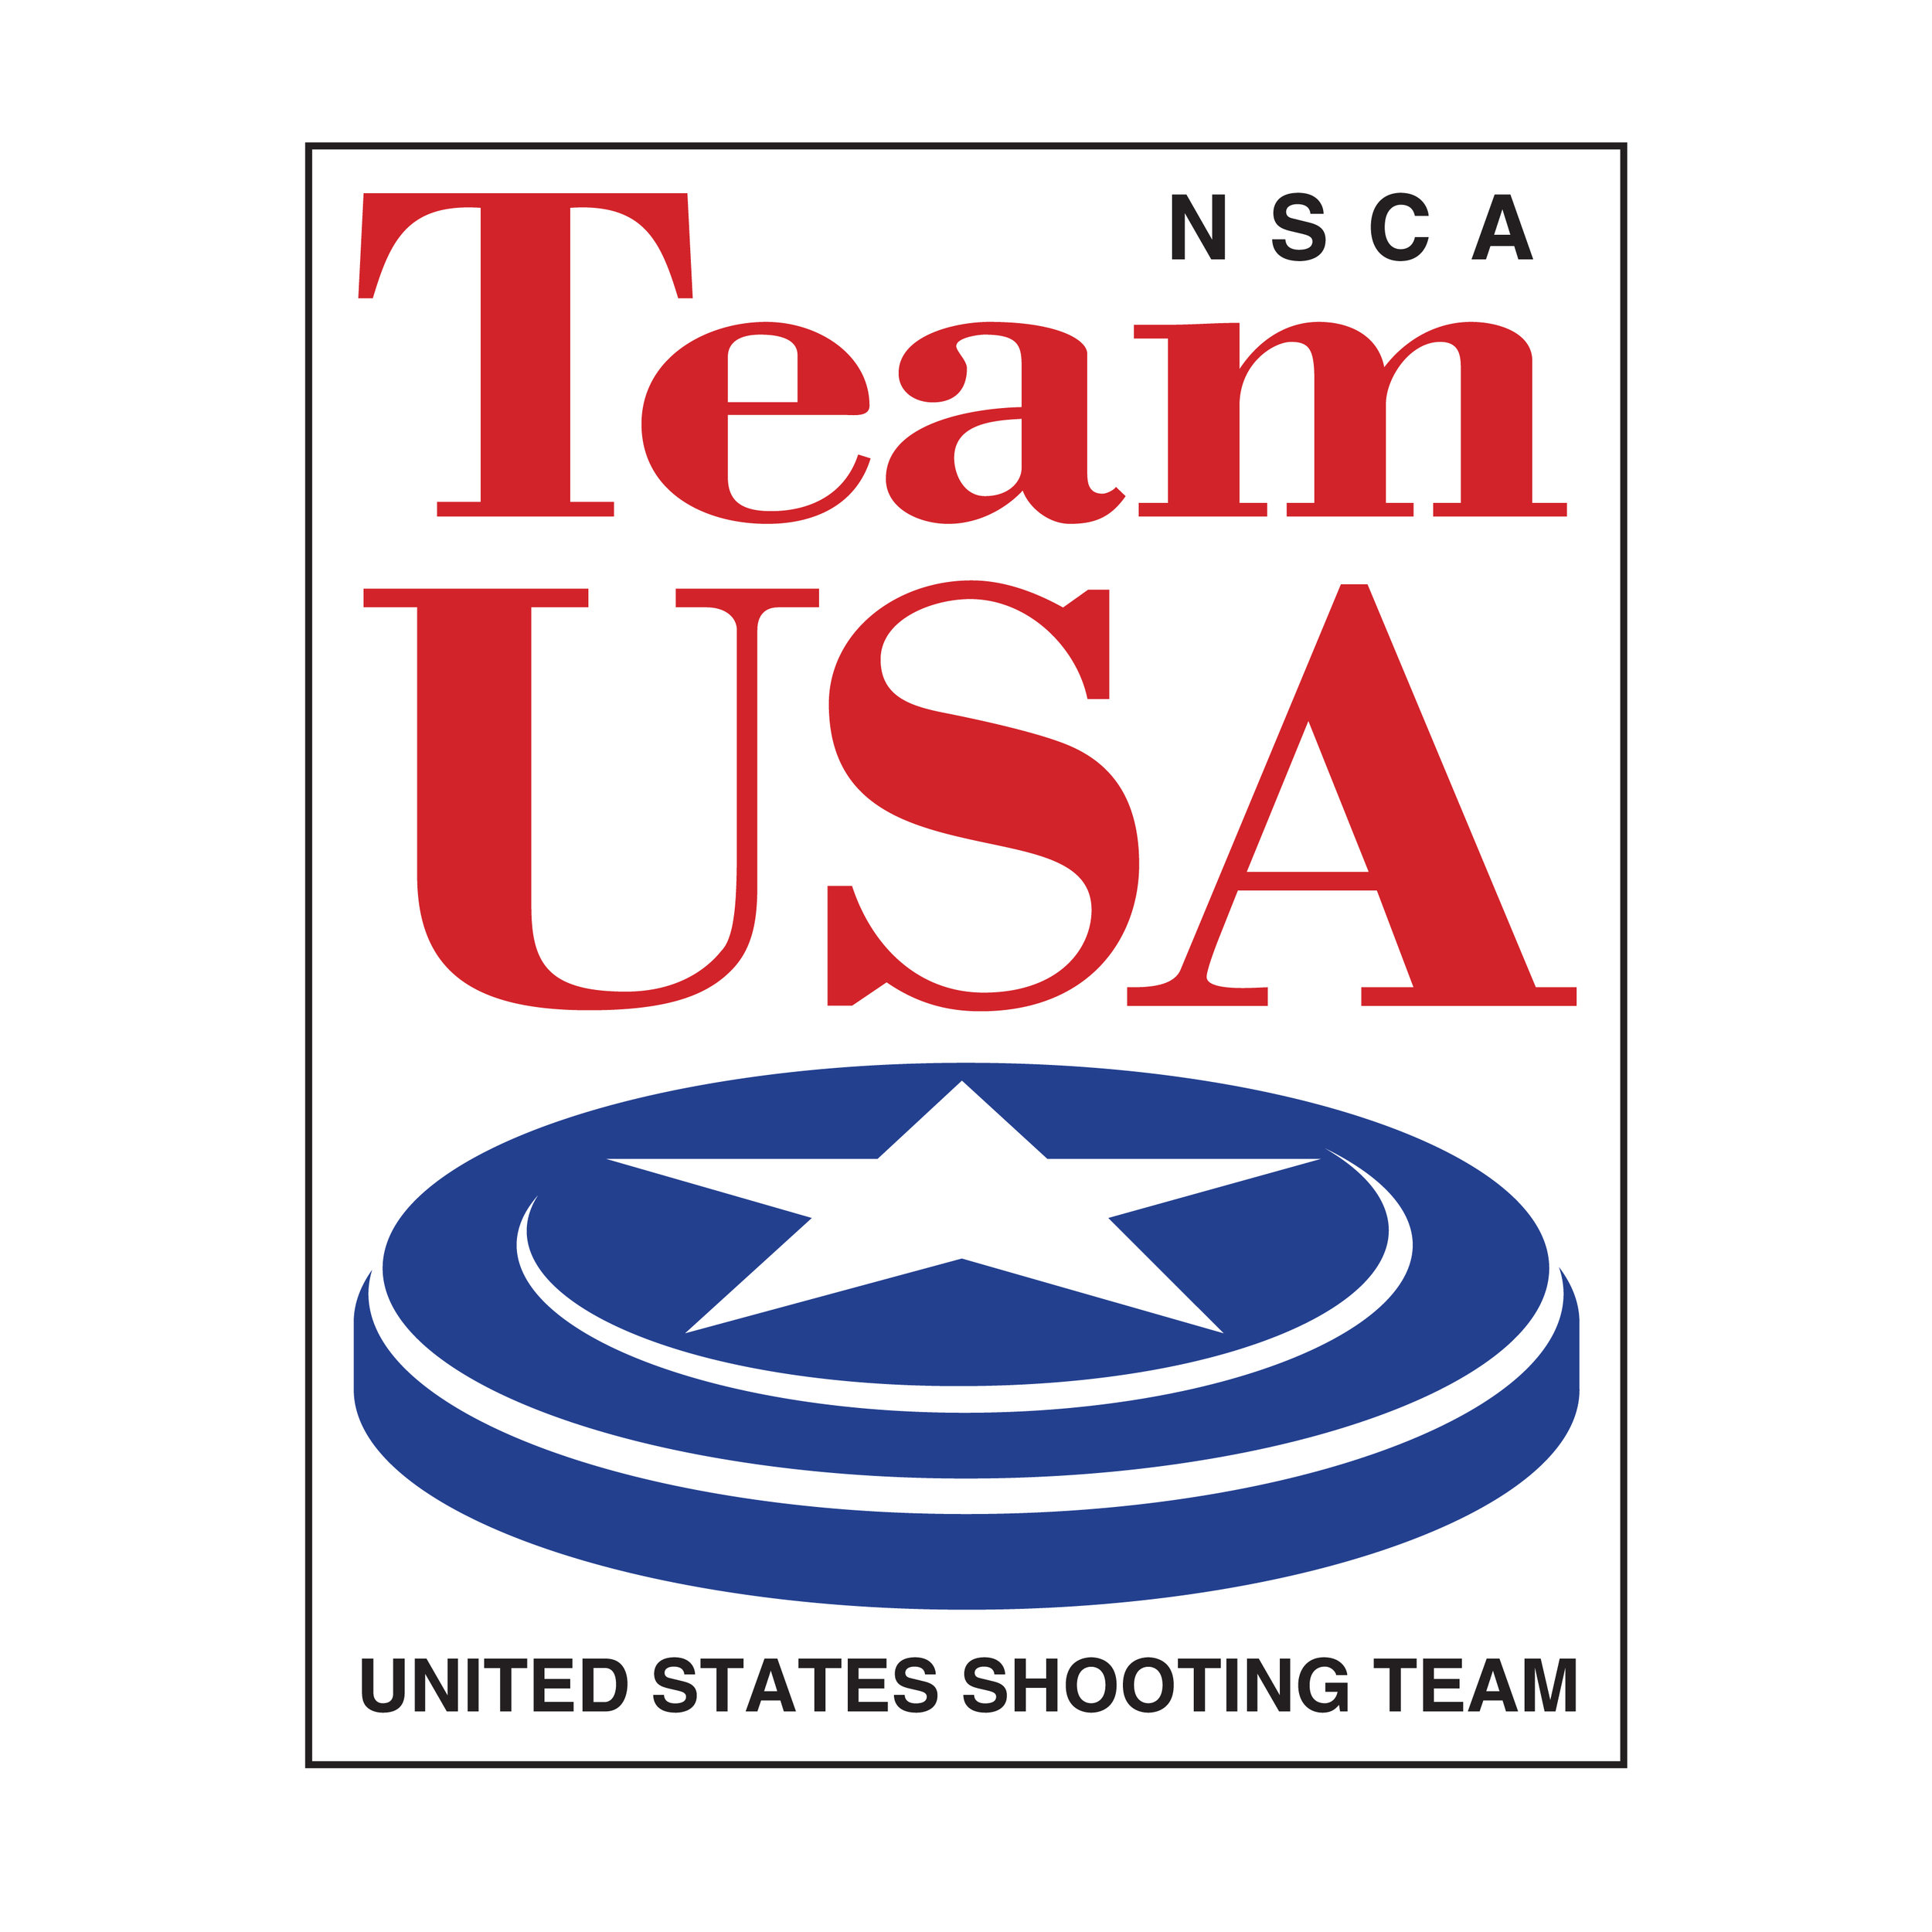  NSCA Team USA logo  United States Shooting Team  Design, branding and creative direction by Chuck Mitchell 